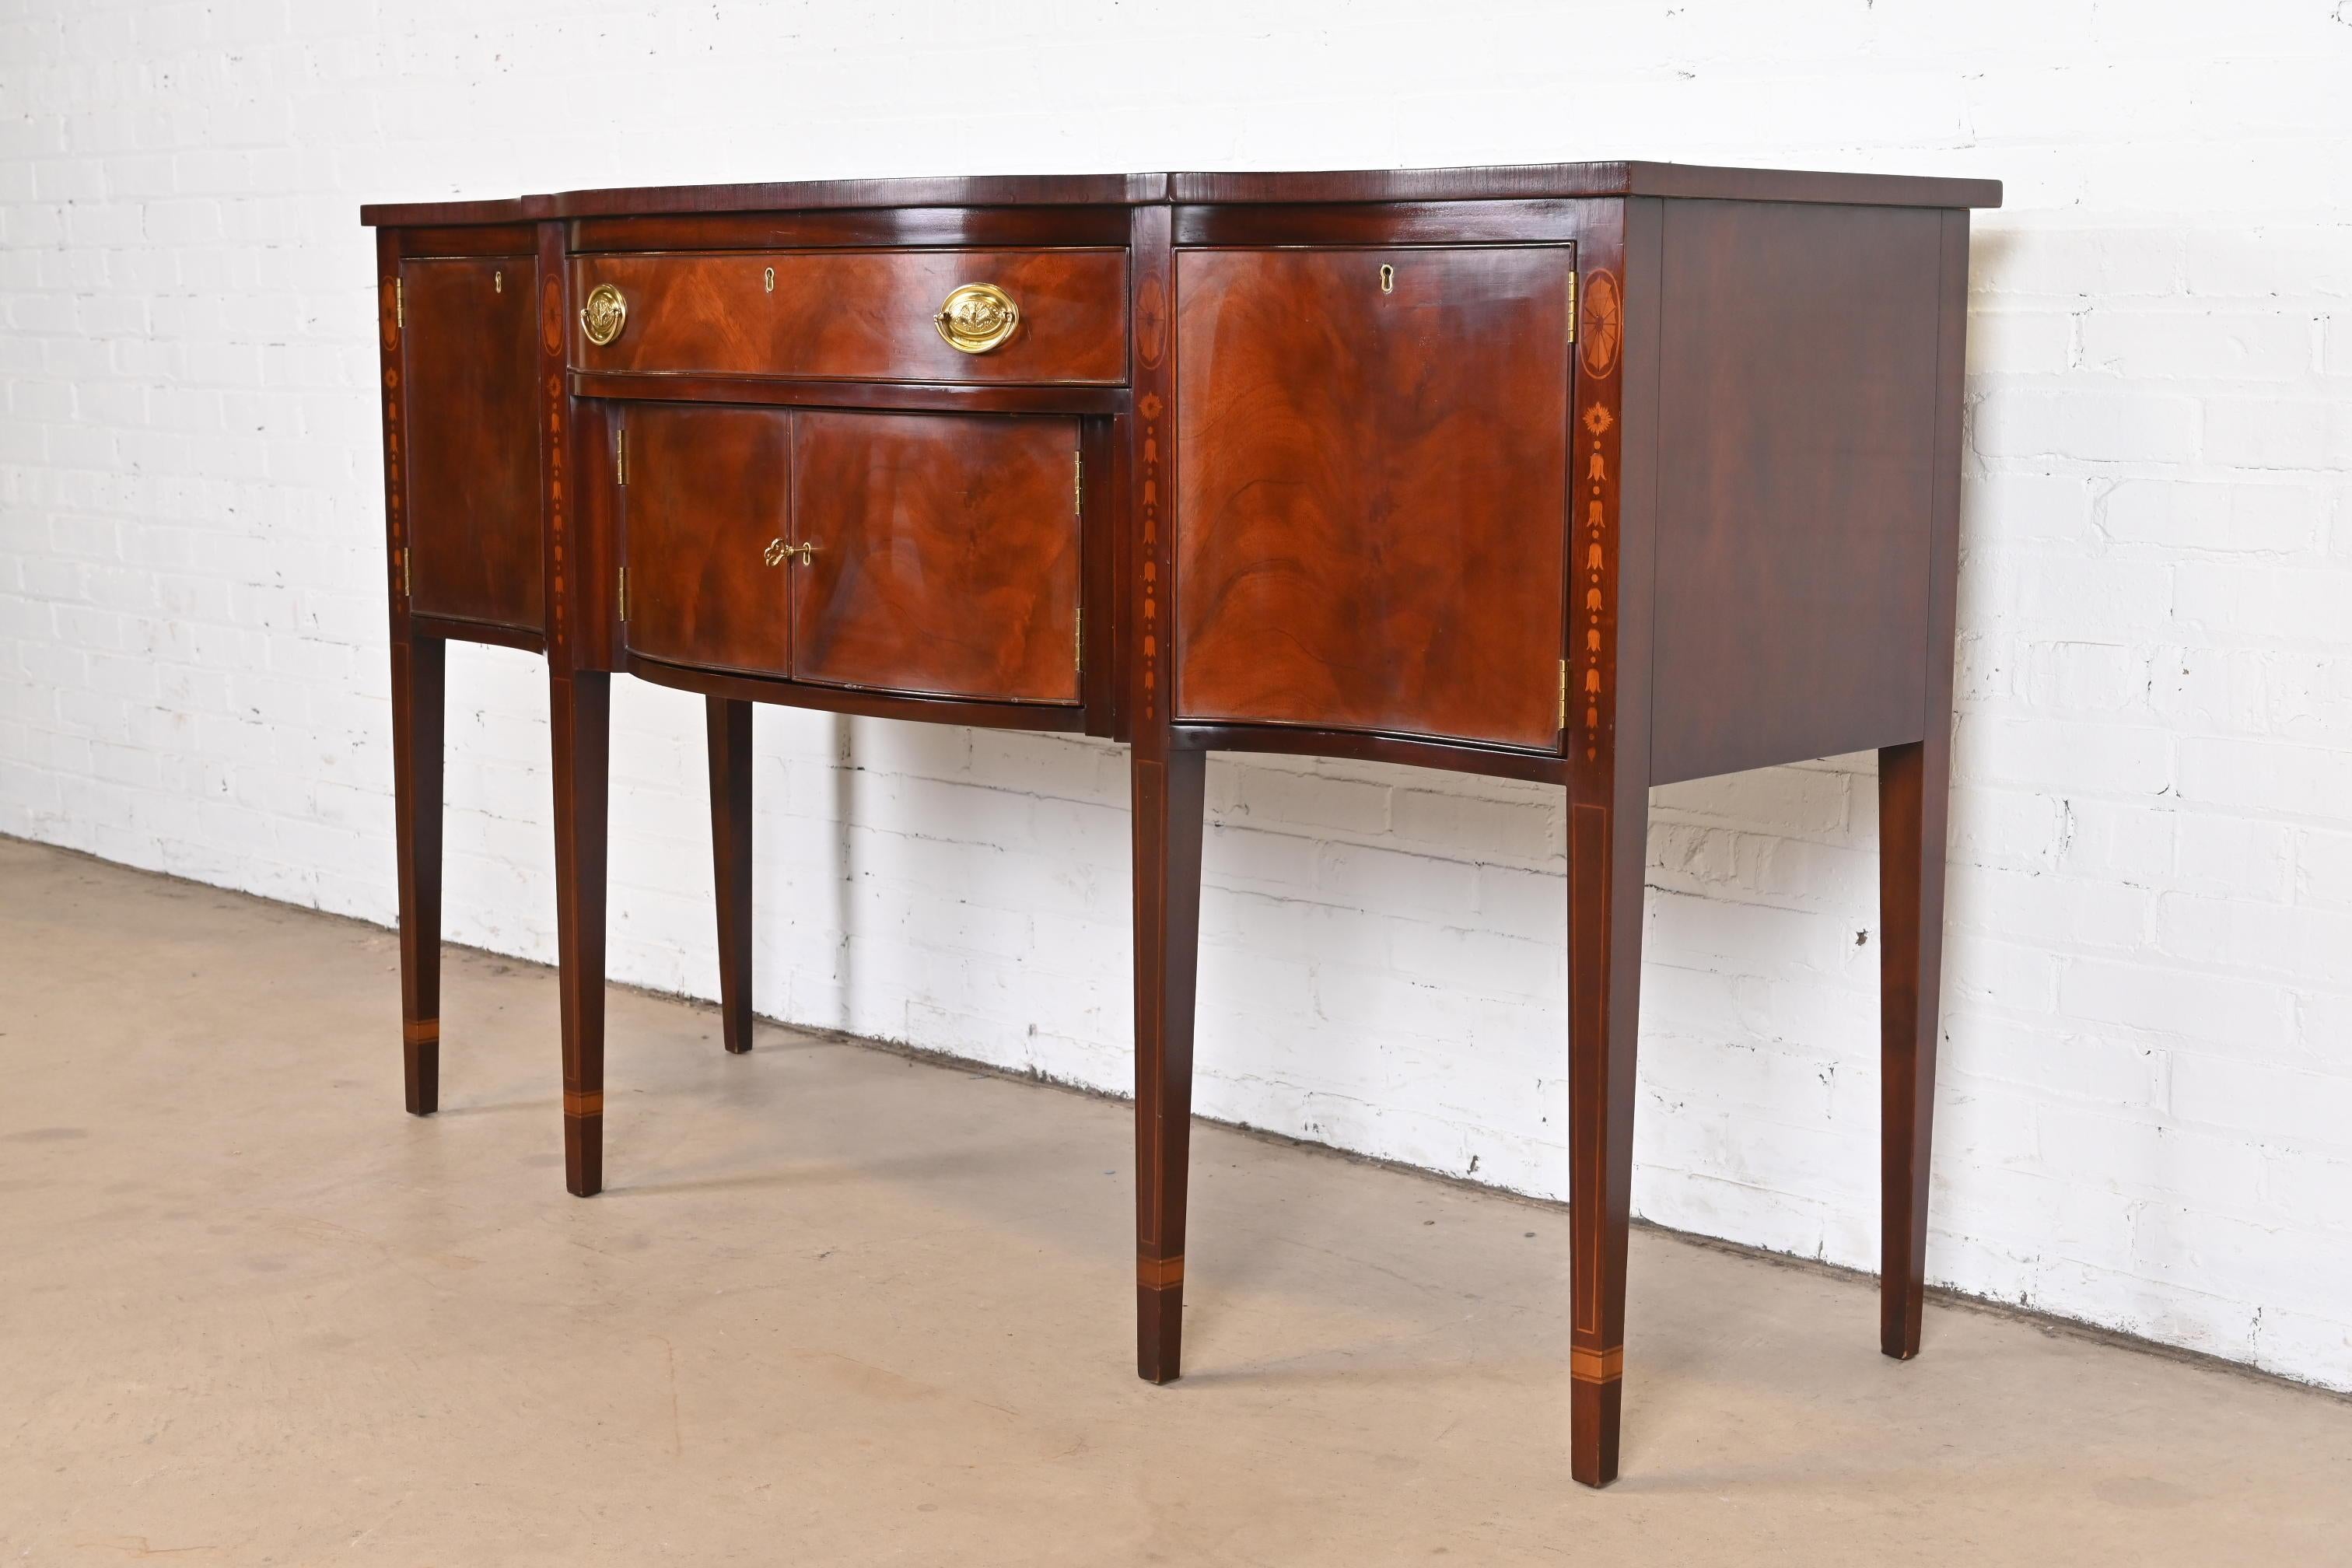 20th Century Kittinger Federal Inlaid Mahogany Bow Front Sideboard Credenza